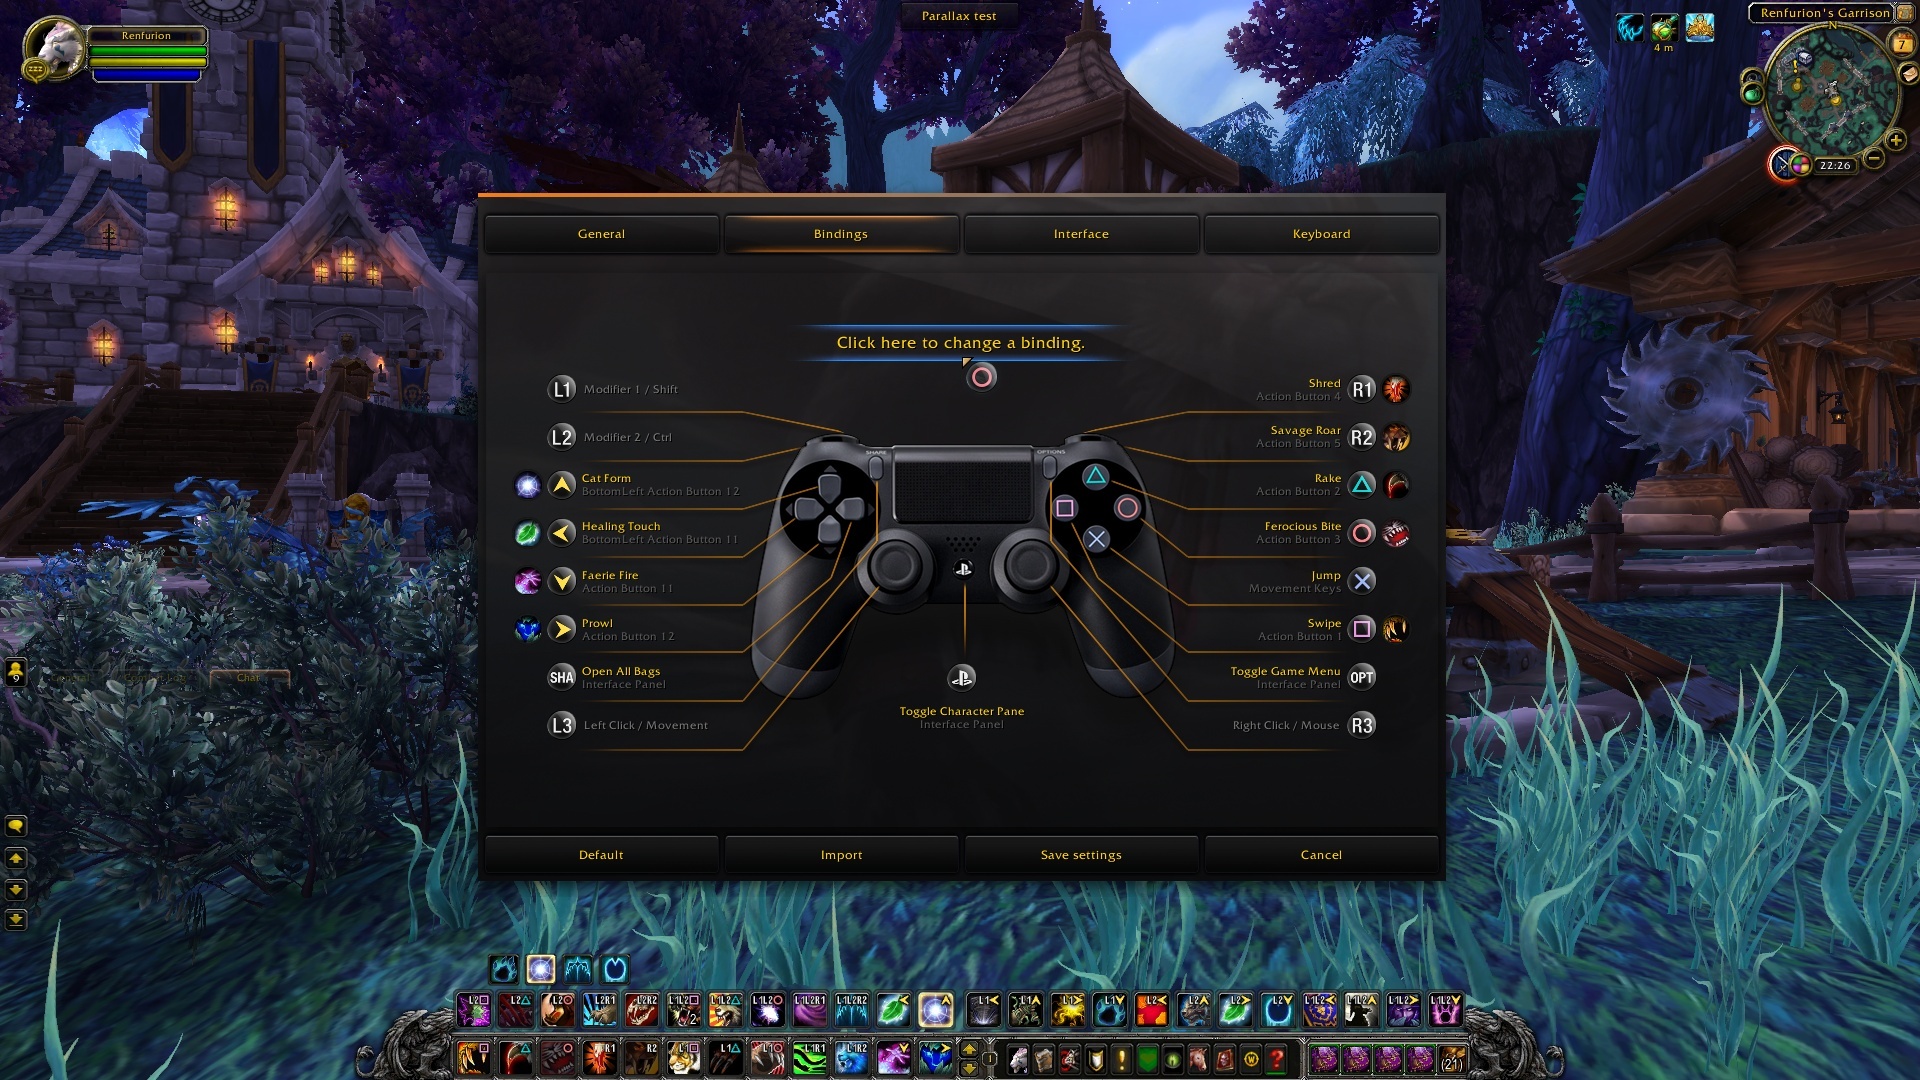 18910-gamepad-support-and-accessibility-in-world-of-warcraft.jpg